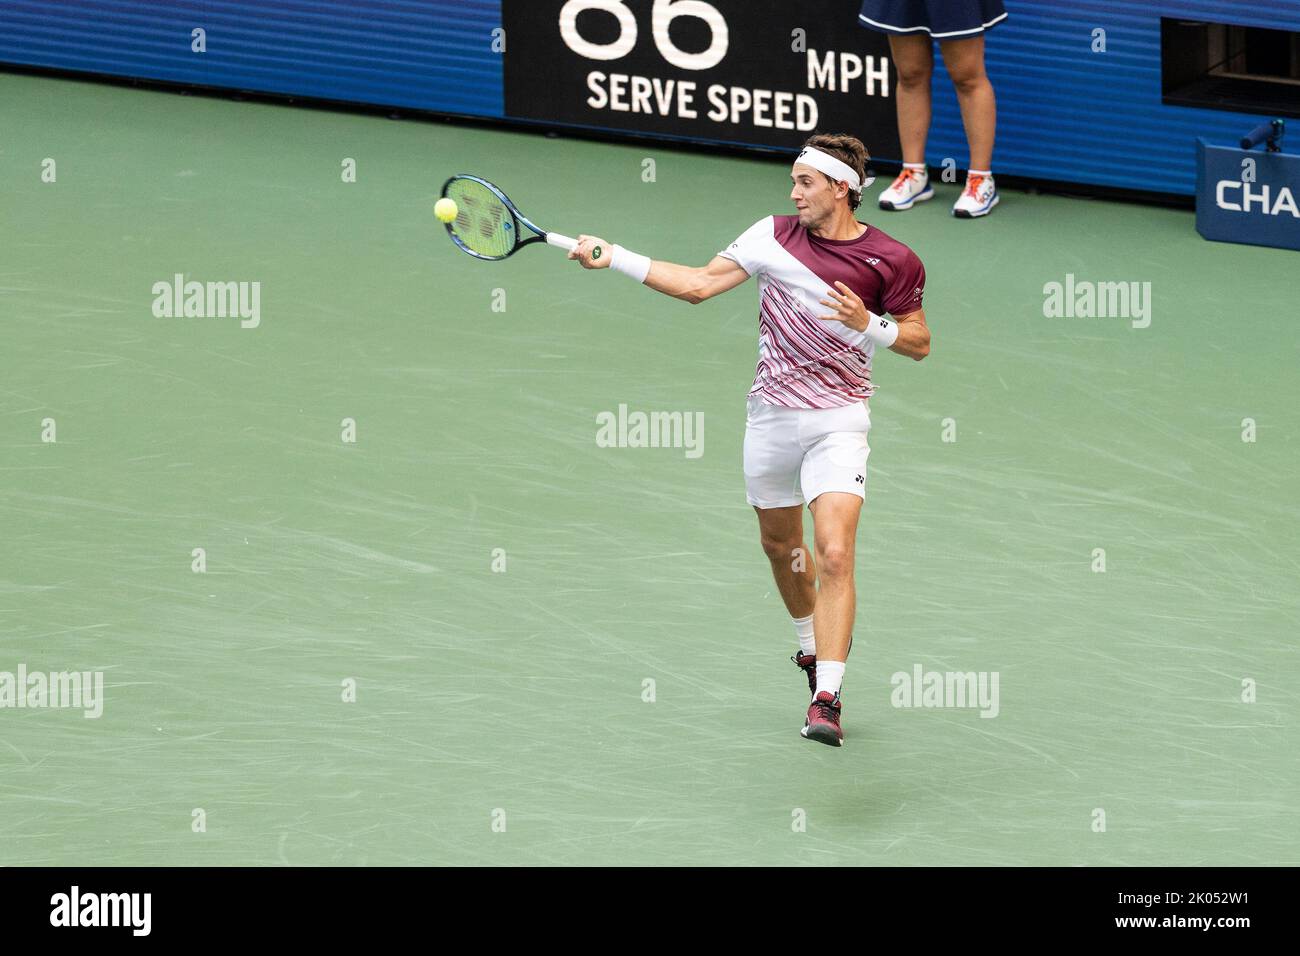 New York, USA. 09th Sep, 2022. Casper Ruud of Norway returns ball during semifinal of US Open Championships against Karen Khachanov at USTA Billie Jean King National Tennis Center in New York on September 9, 2022. Ruud won in four sets and will play his first ever US Open final. (Photo by Lev Radin/Sipa USA) Credit: Sipa USA/Alamy Live News Stock Photo